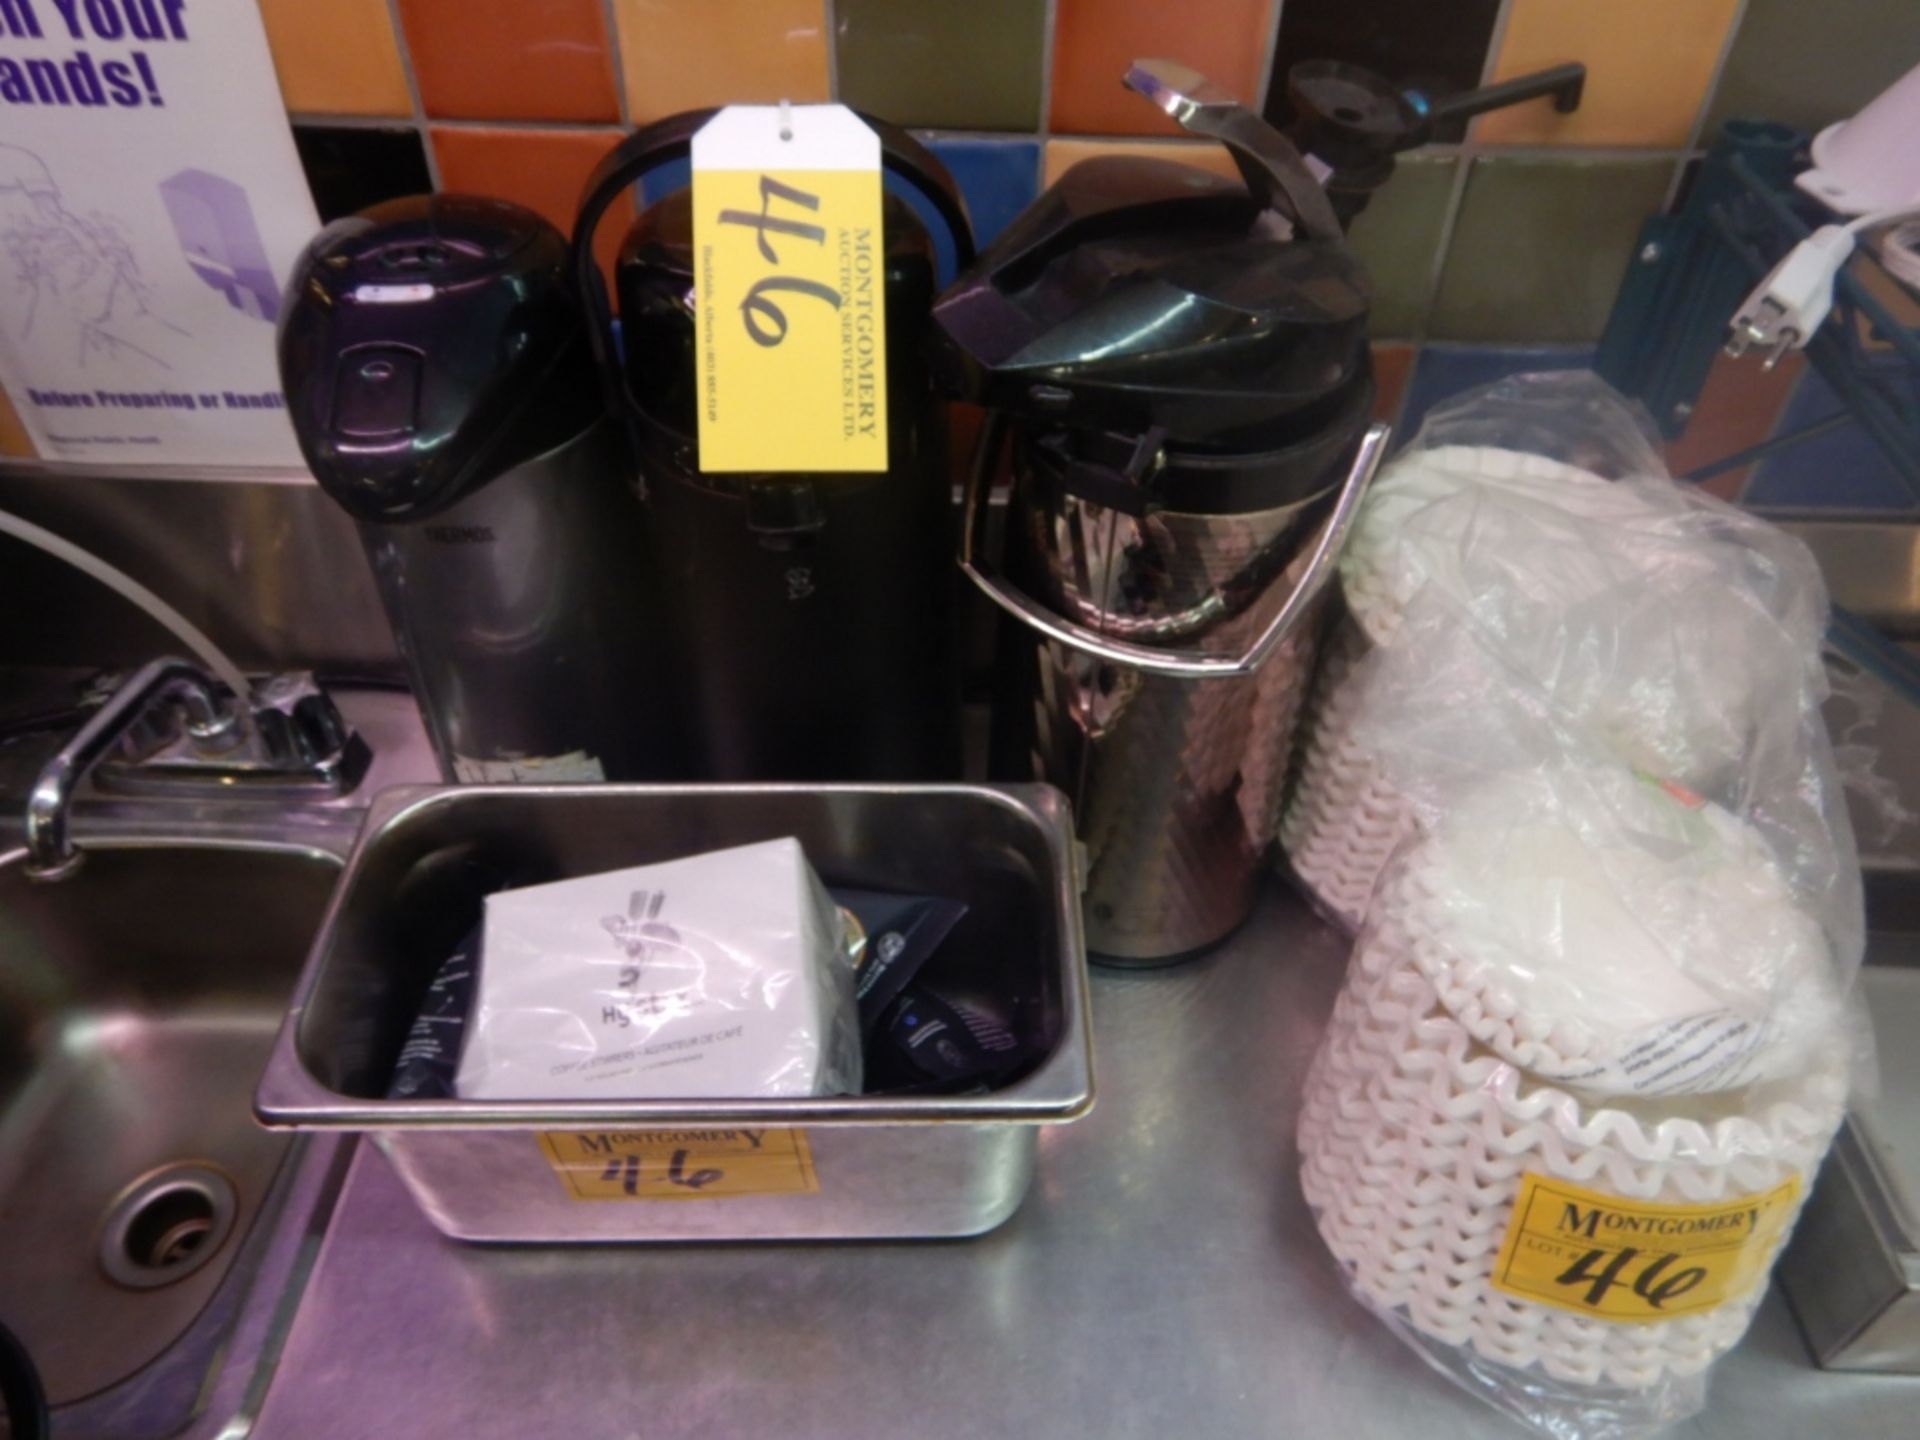 3-HOT BEVERAGE CARAFES, 2-SS SANDWICH CONDIMENT TRAYS, COFFEE FILTERS, ELEC. KETTLE, STIR STICKS - Image 3 of 5